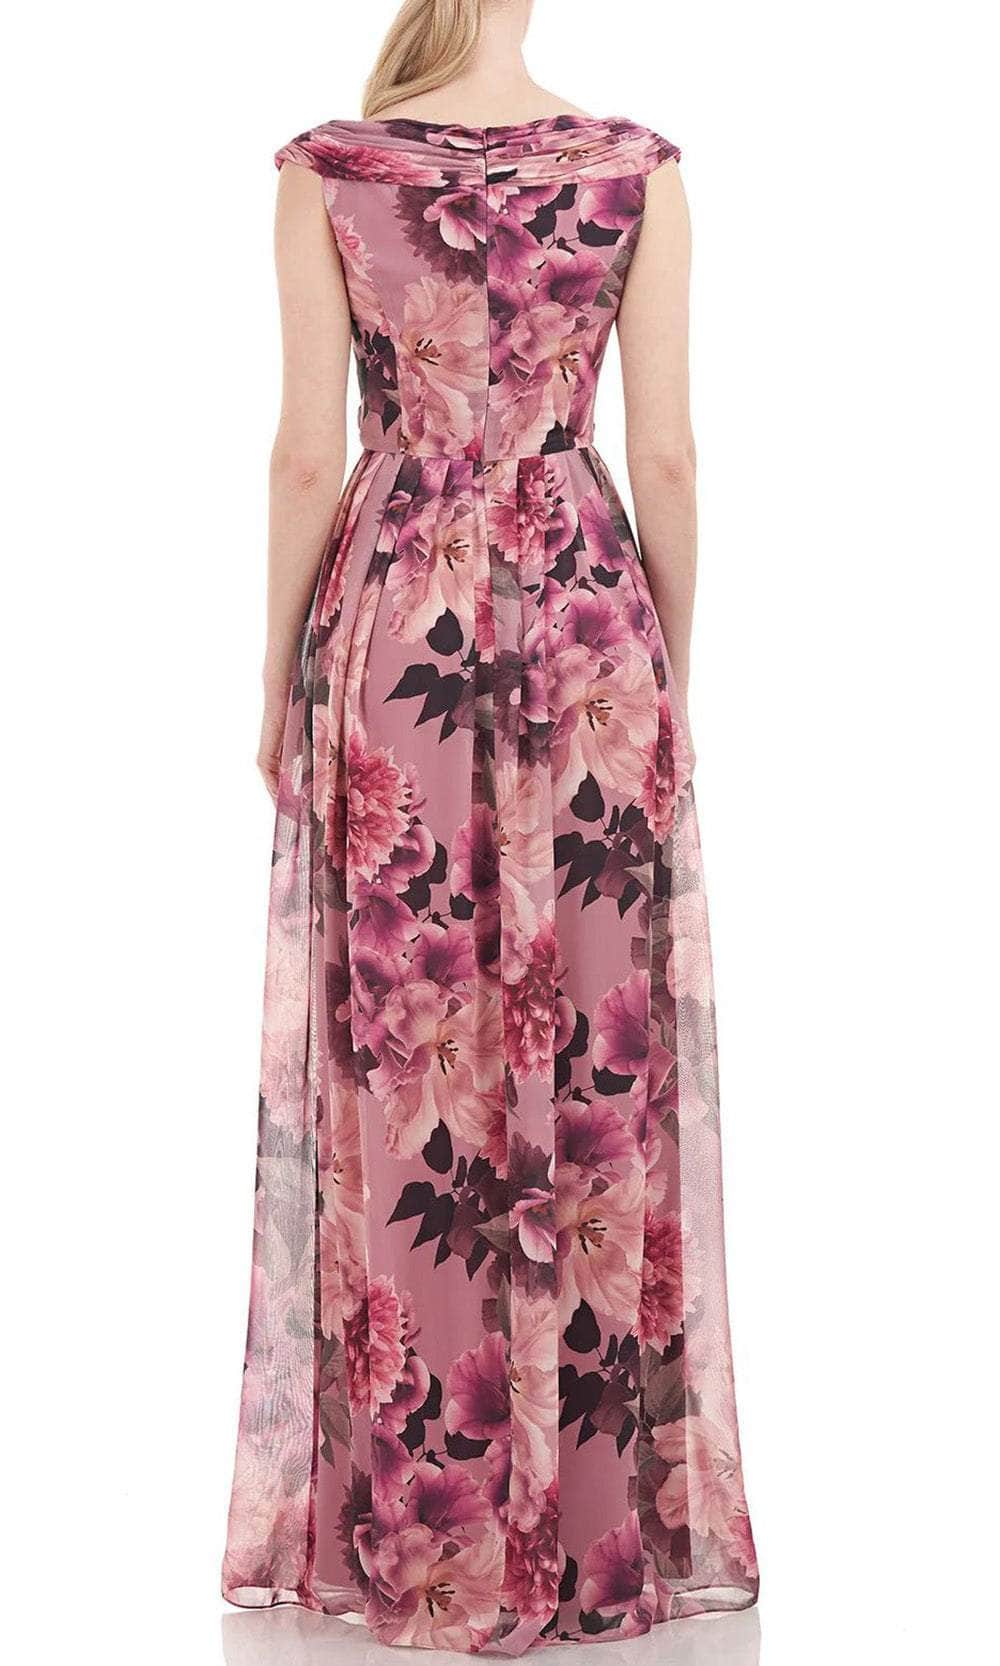 Kay Unger 5518984 - Scoop Neck Printed Evening Dress Special Occasion Dress